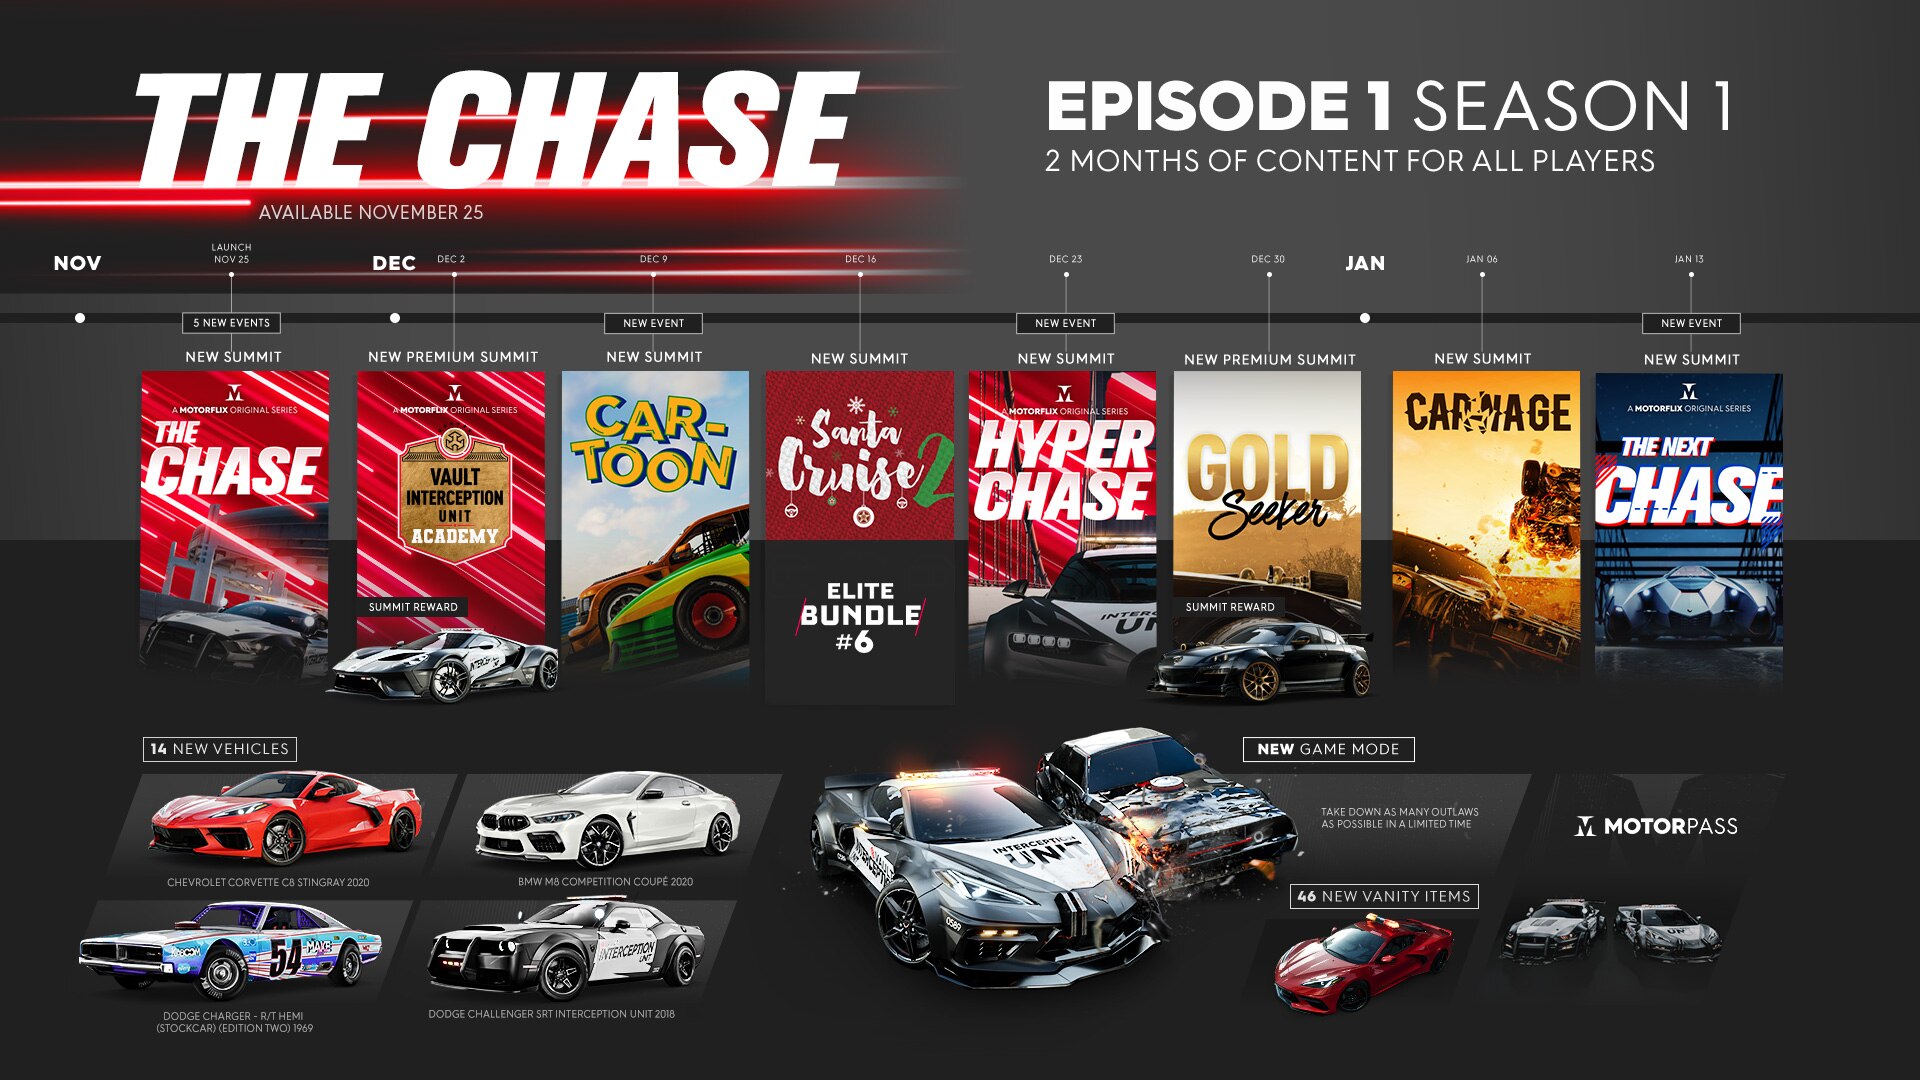 [TC2][News] Season 1 Episode 1: The Chase – Patch 1.8.0 Notes – November 25 - img1